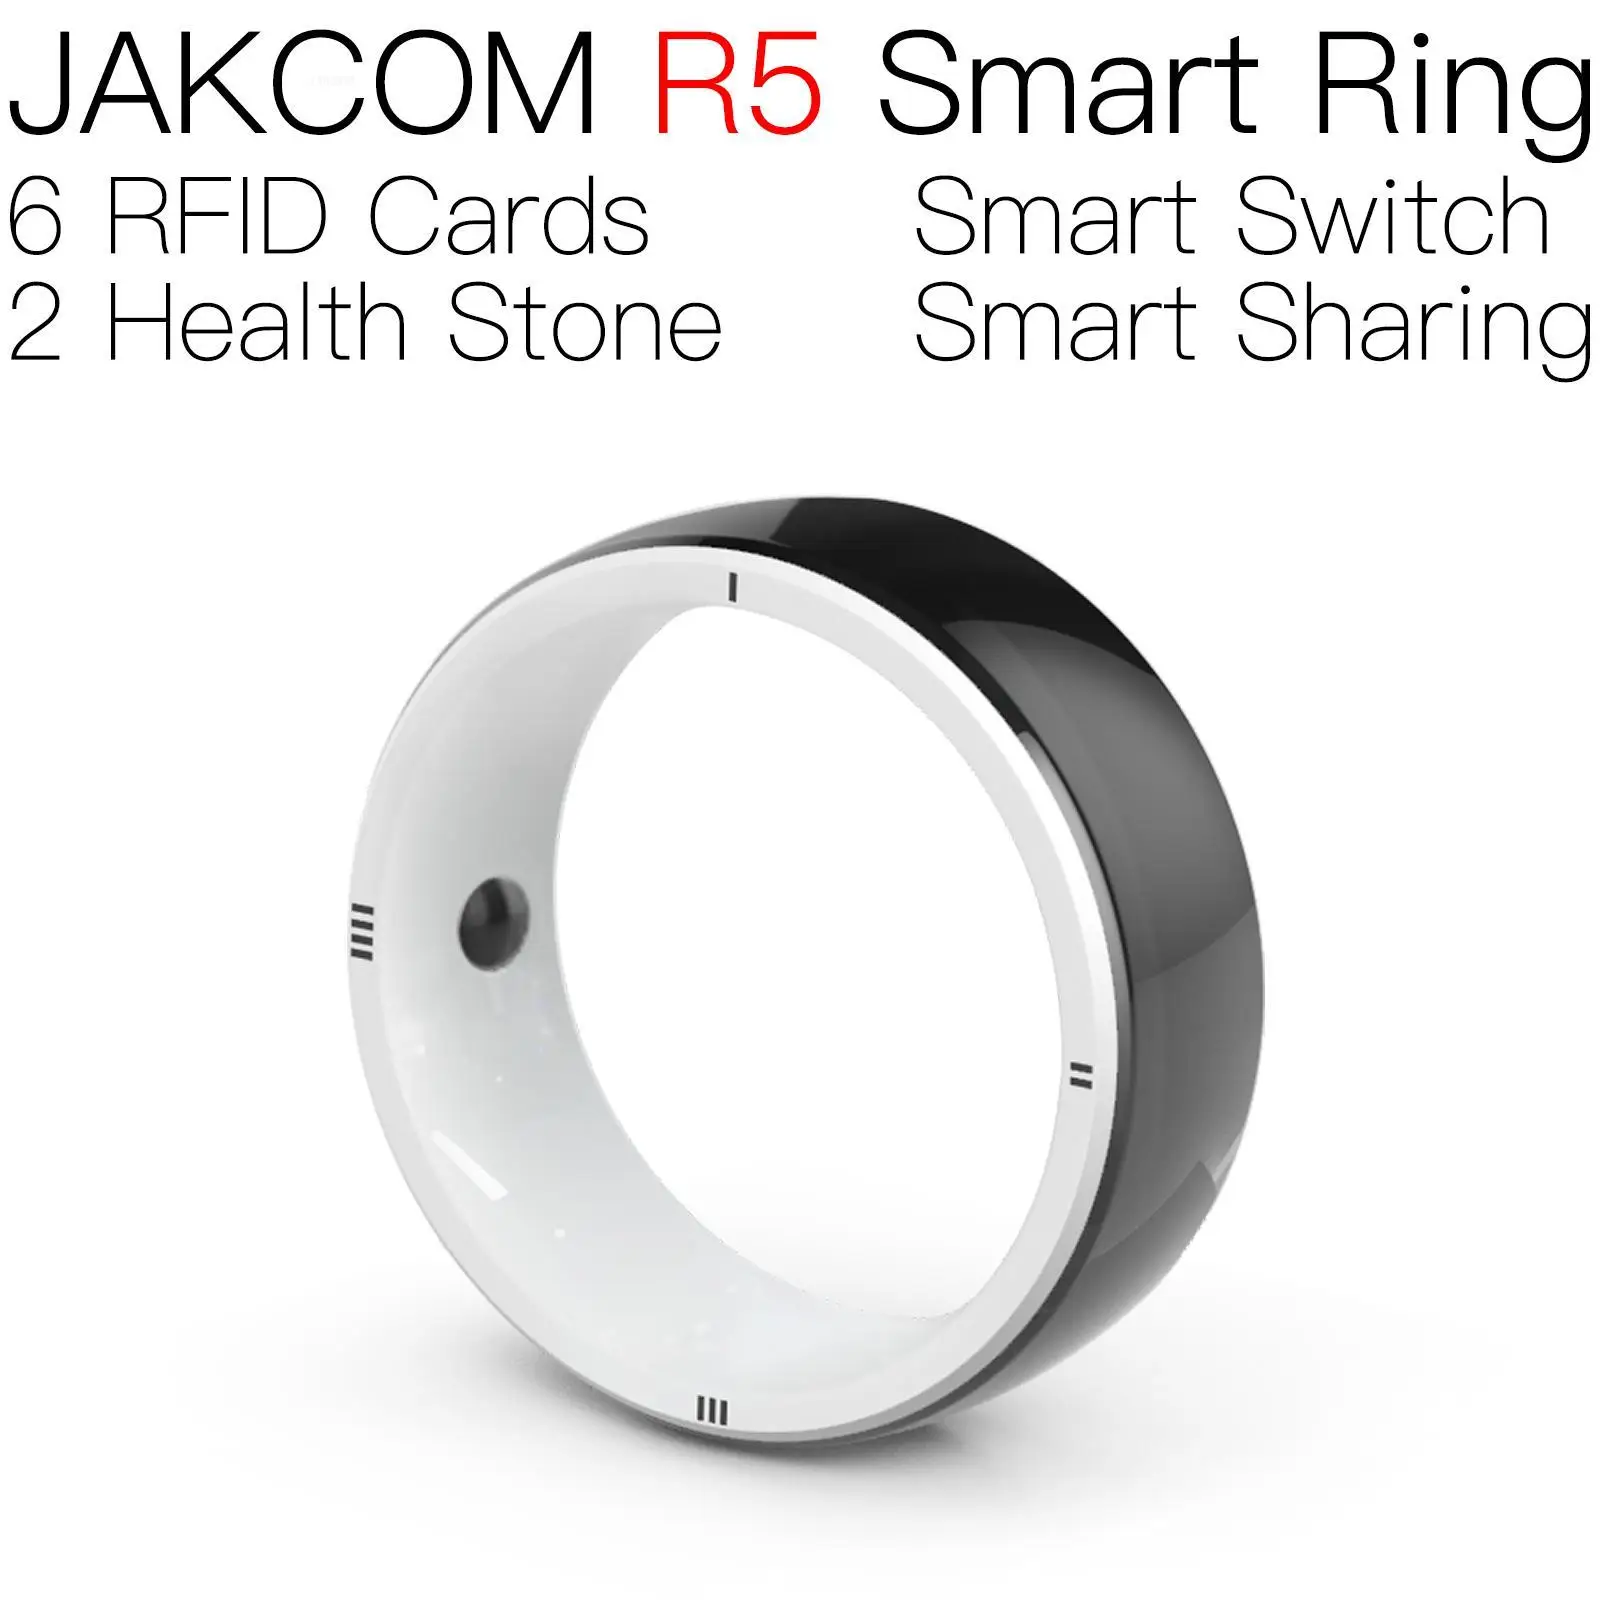 

JAKCOM R5 Smart Ring Match to smart track watch watches for women adyce official store 4 ladies free shipping